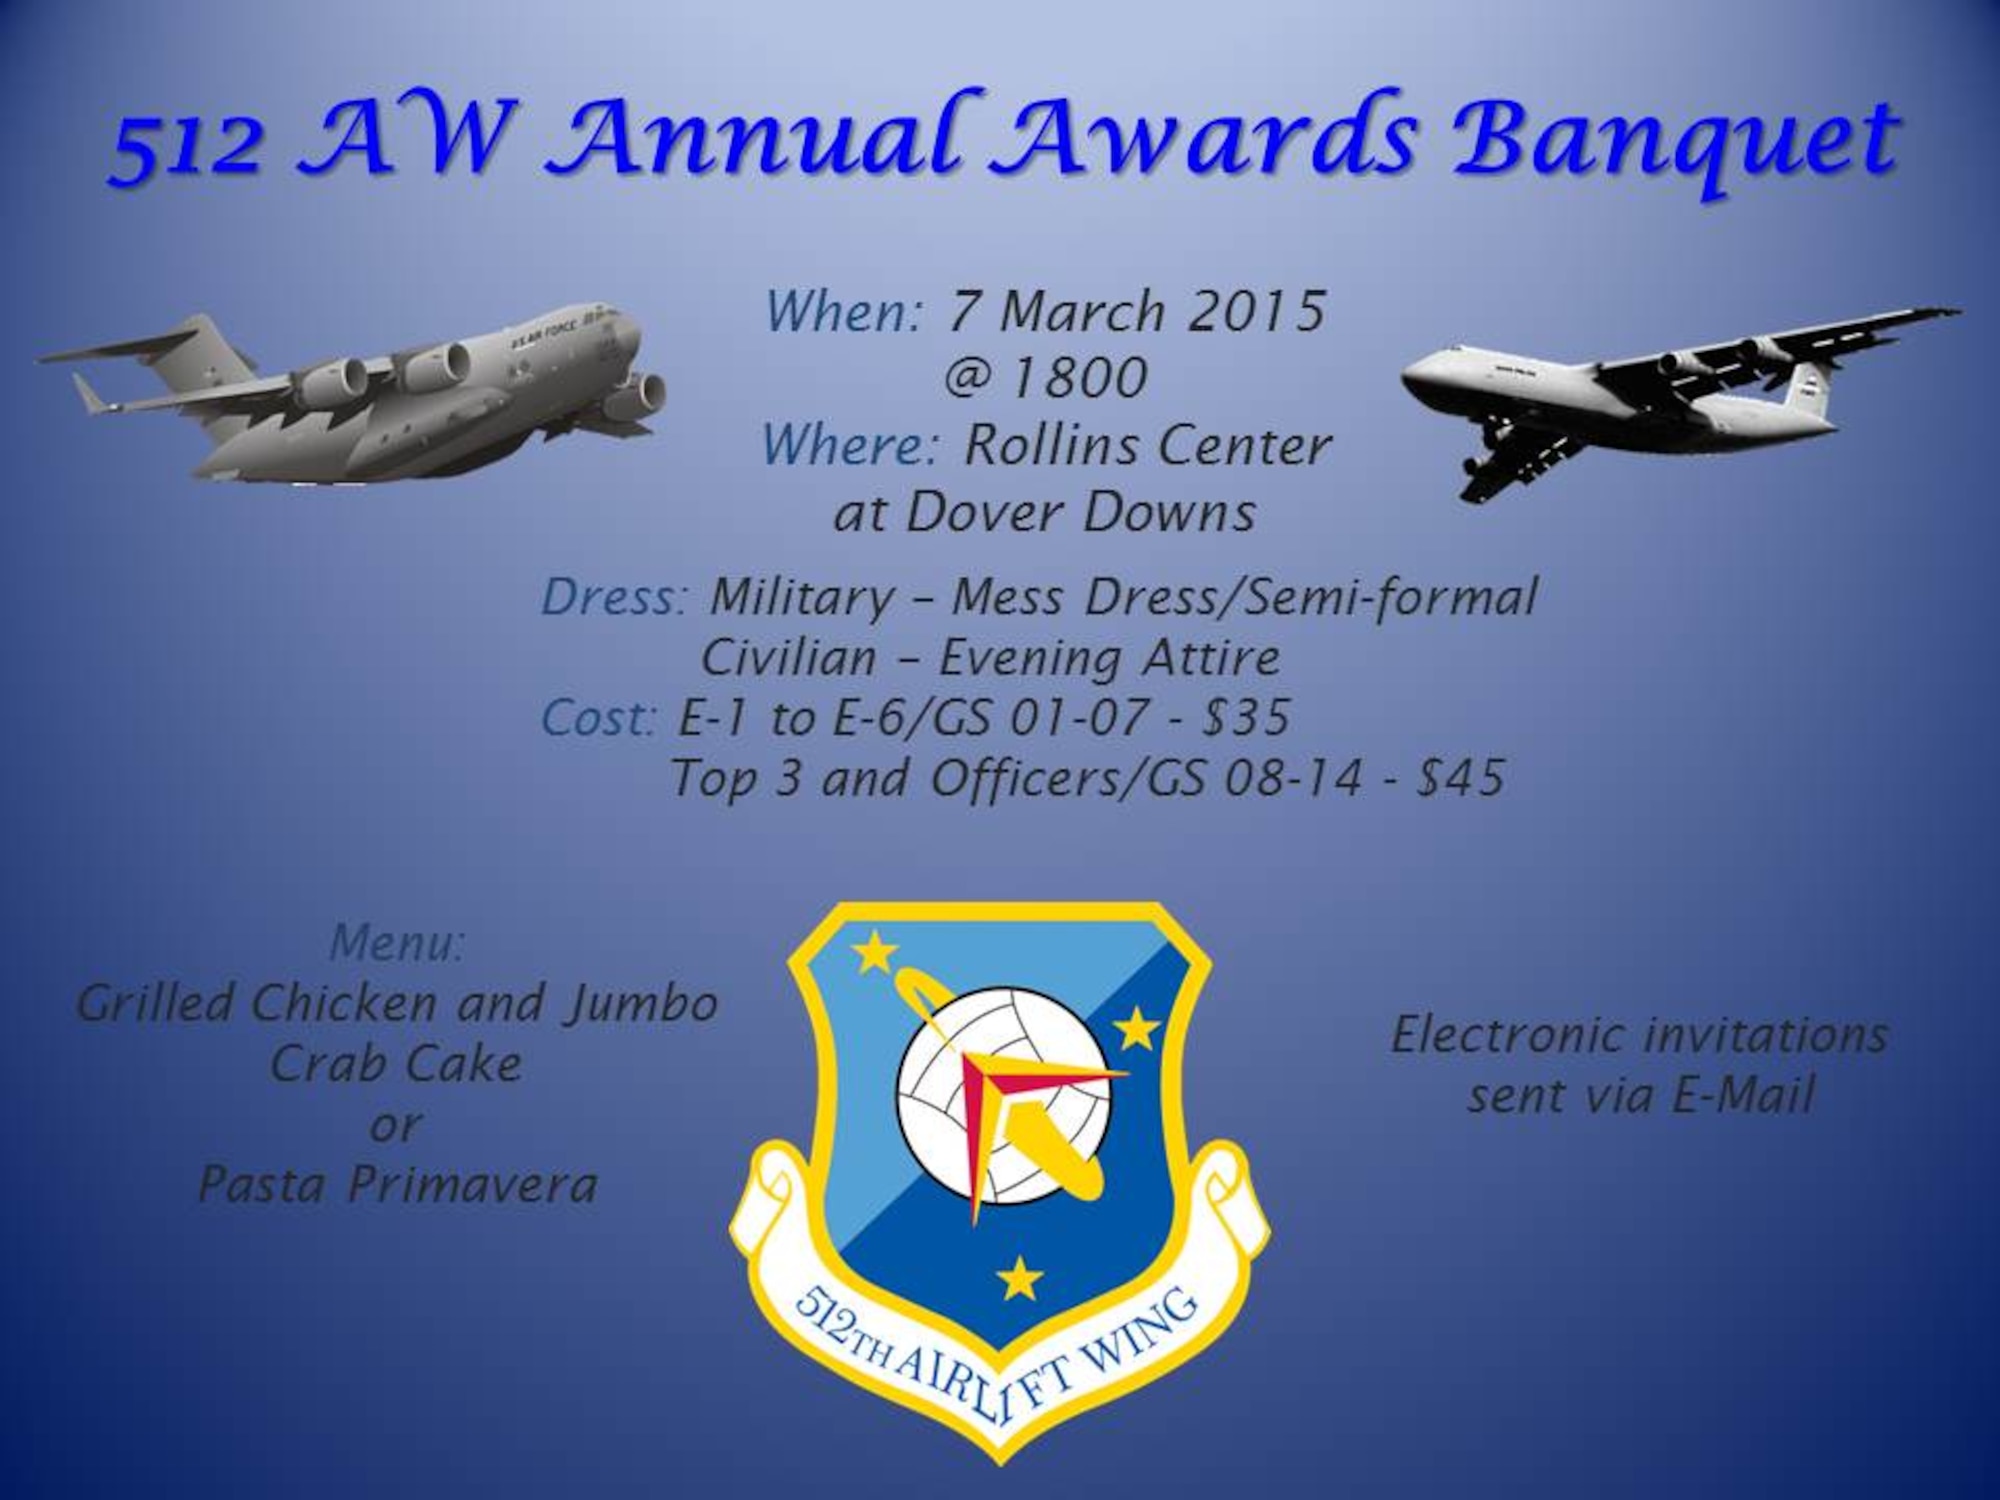 512th Airlift Wing's Award Banquet: Tickets are now available on "E-Invitations". Refer to the flyer for pricing information. 

E-Invite Link: https://einvitations.afit.edu/inv/anim.cfm?i=222027&k=006340097950 